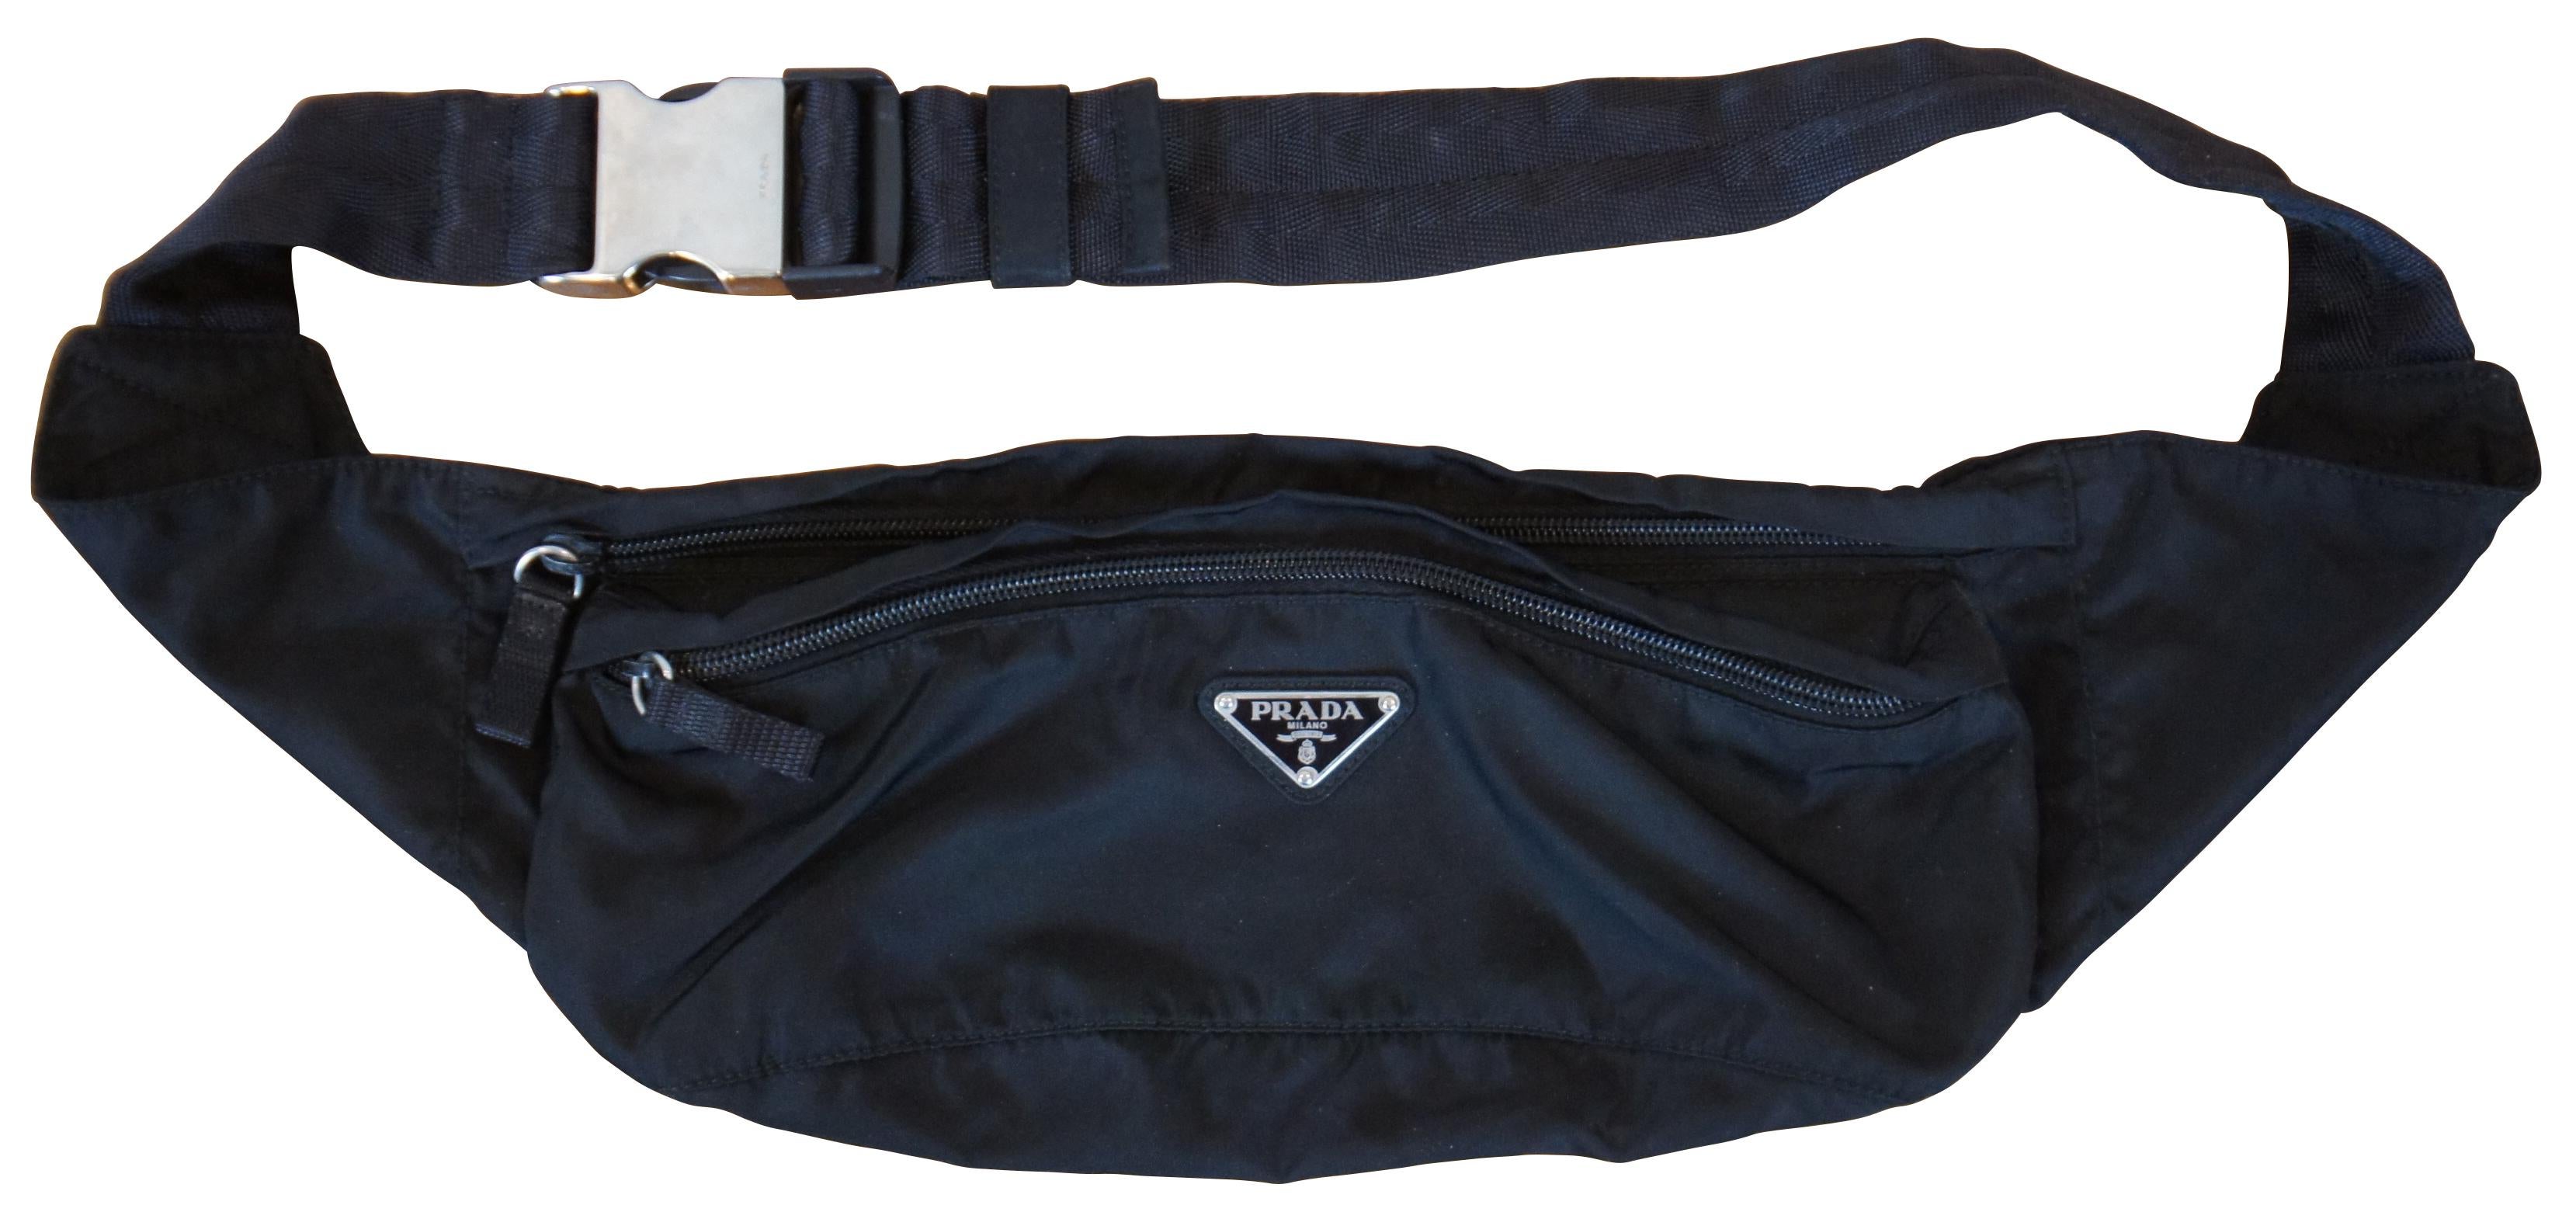 Prada black nylon wait pouch or fanny pack with two zippered compartments and silver tone buckle.

Measured with Belt at Longest - 43” x 3.5” x 5” (Length x Width x Height).